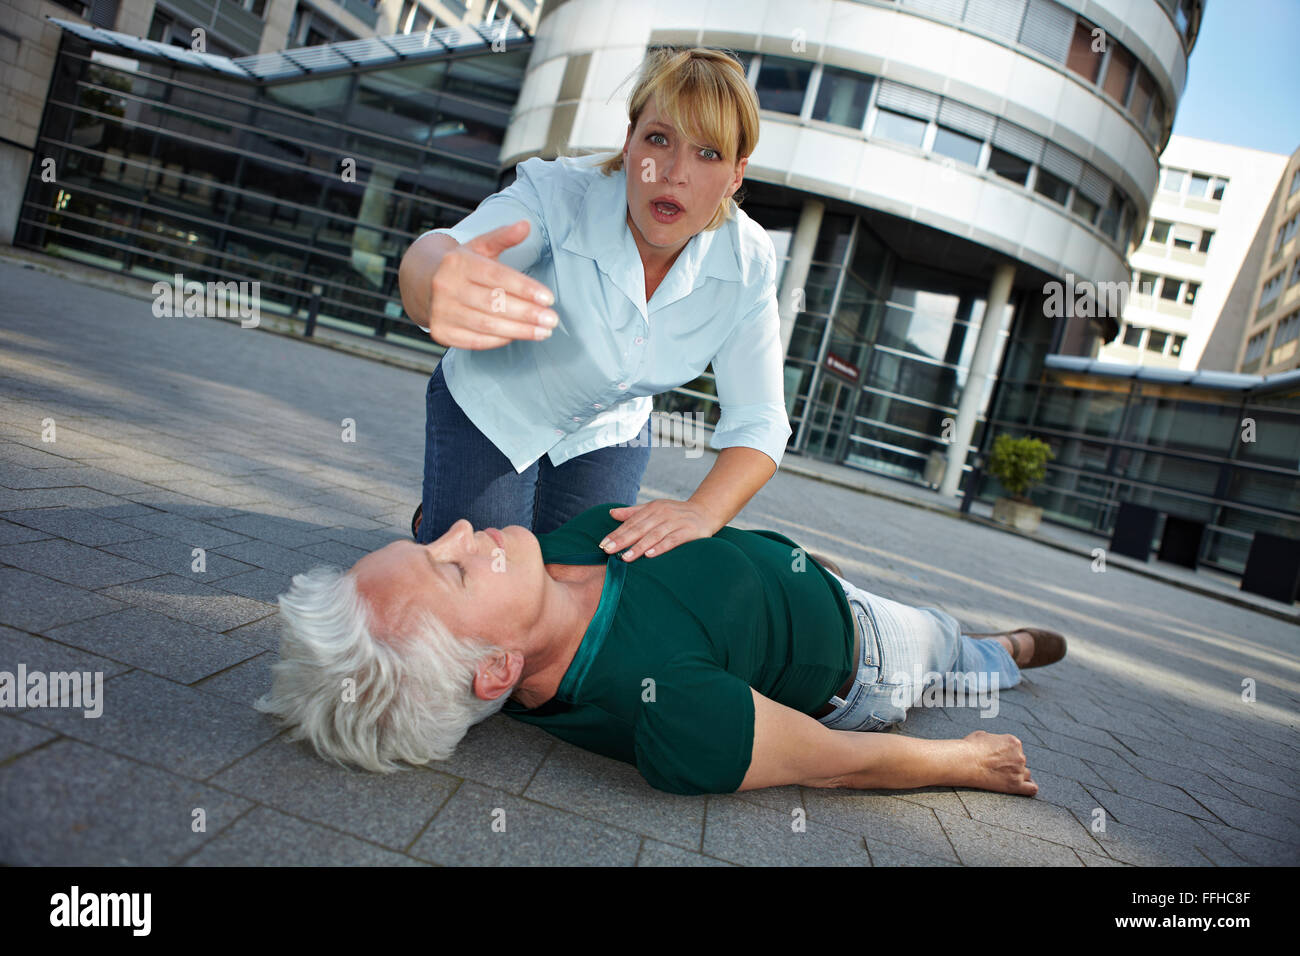 Passerby with unconscious senior woman asking for First Aid help Stock Photo